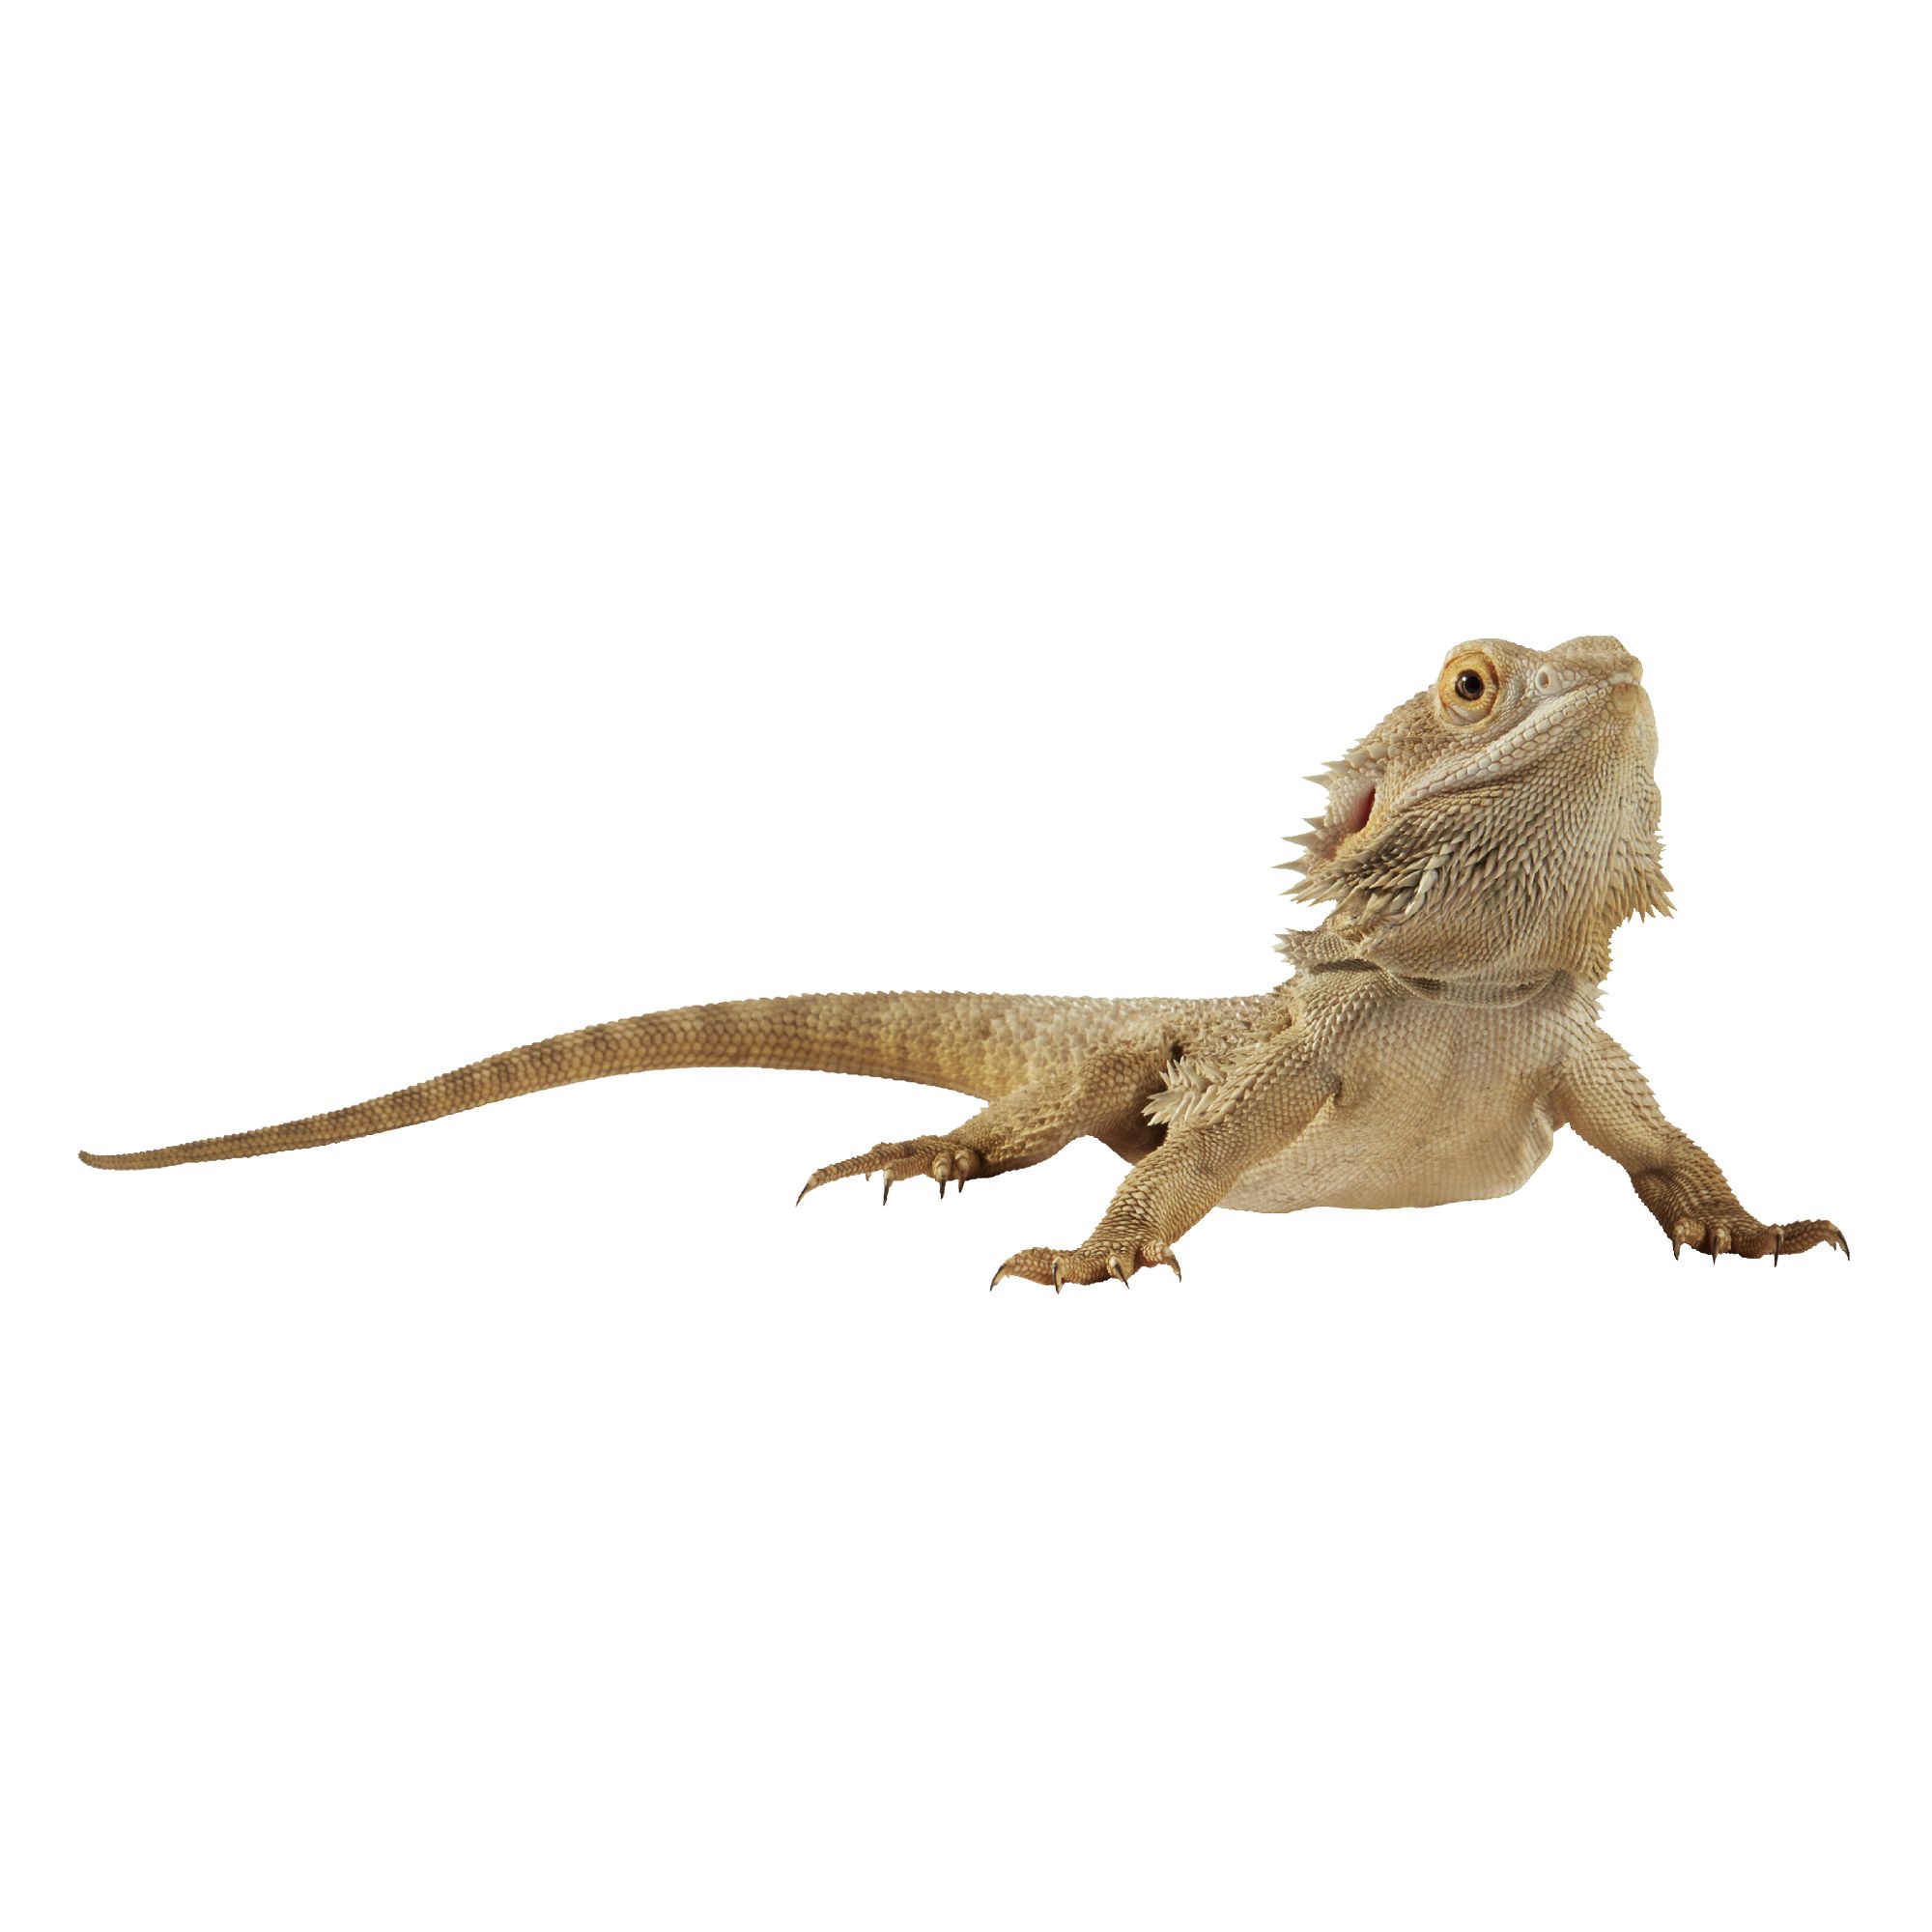 Bearded Dragon For Sale Live Pet Reptiles Petsmart,How To Play Hearts Of Iron 4